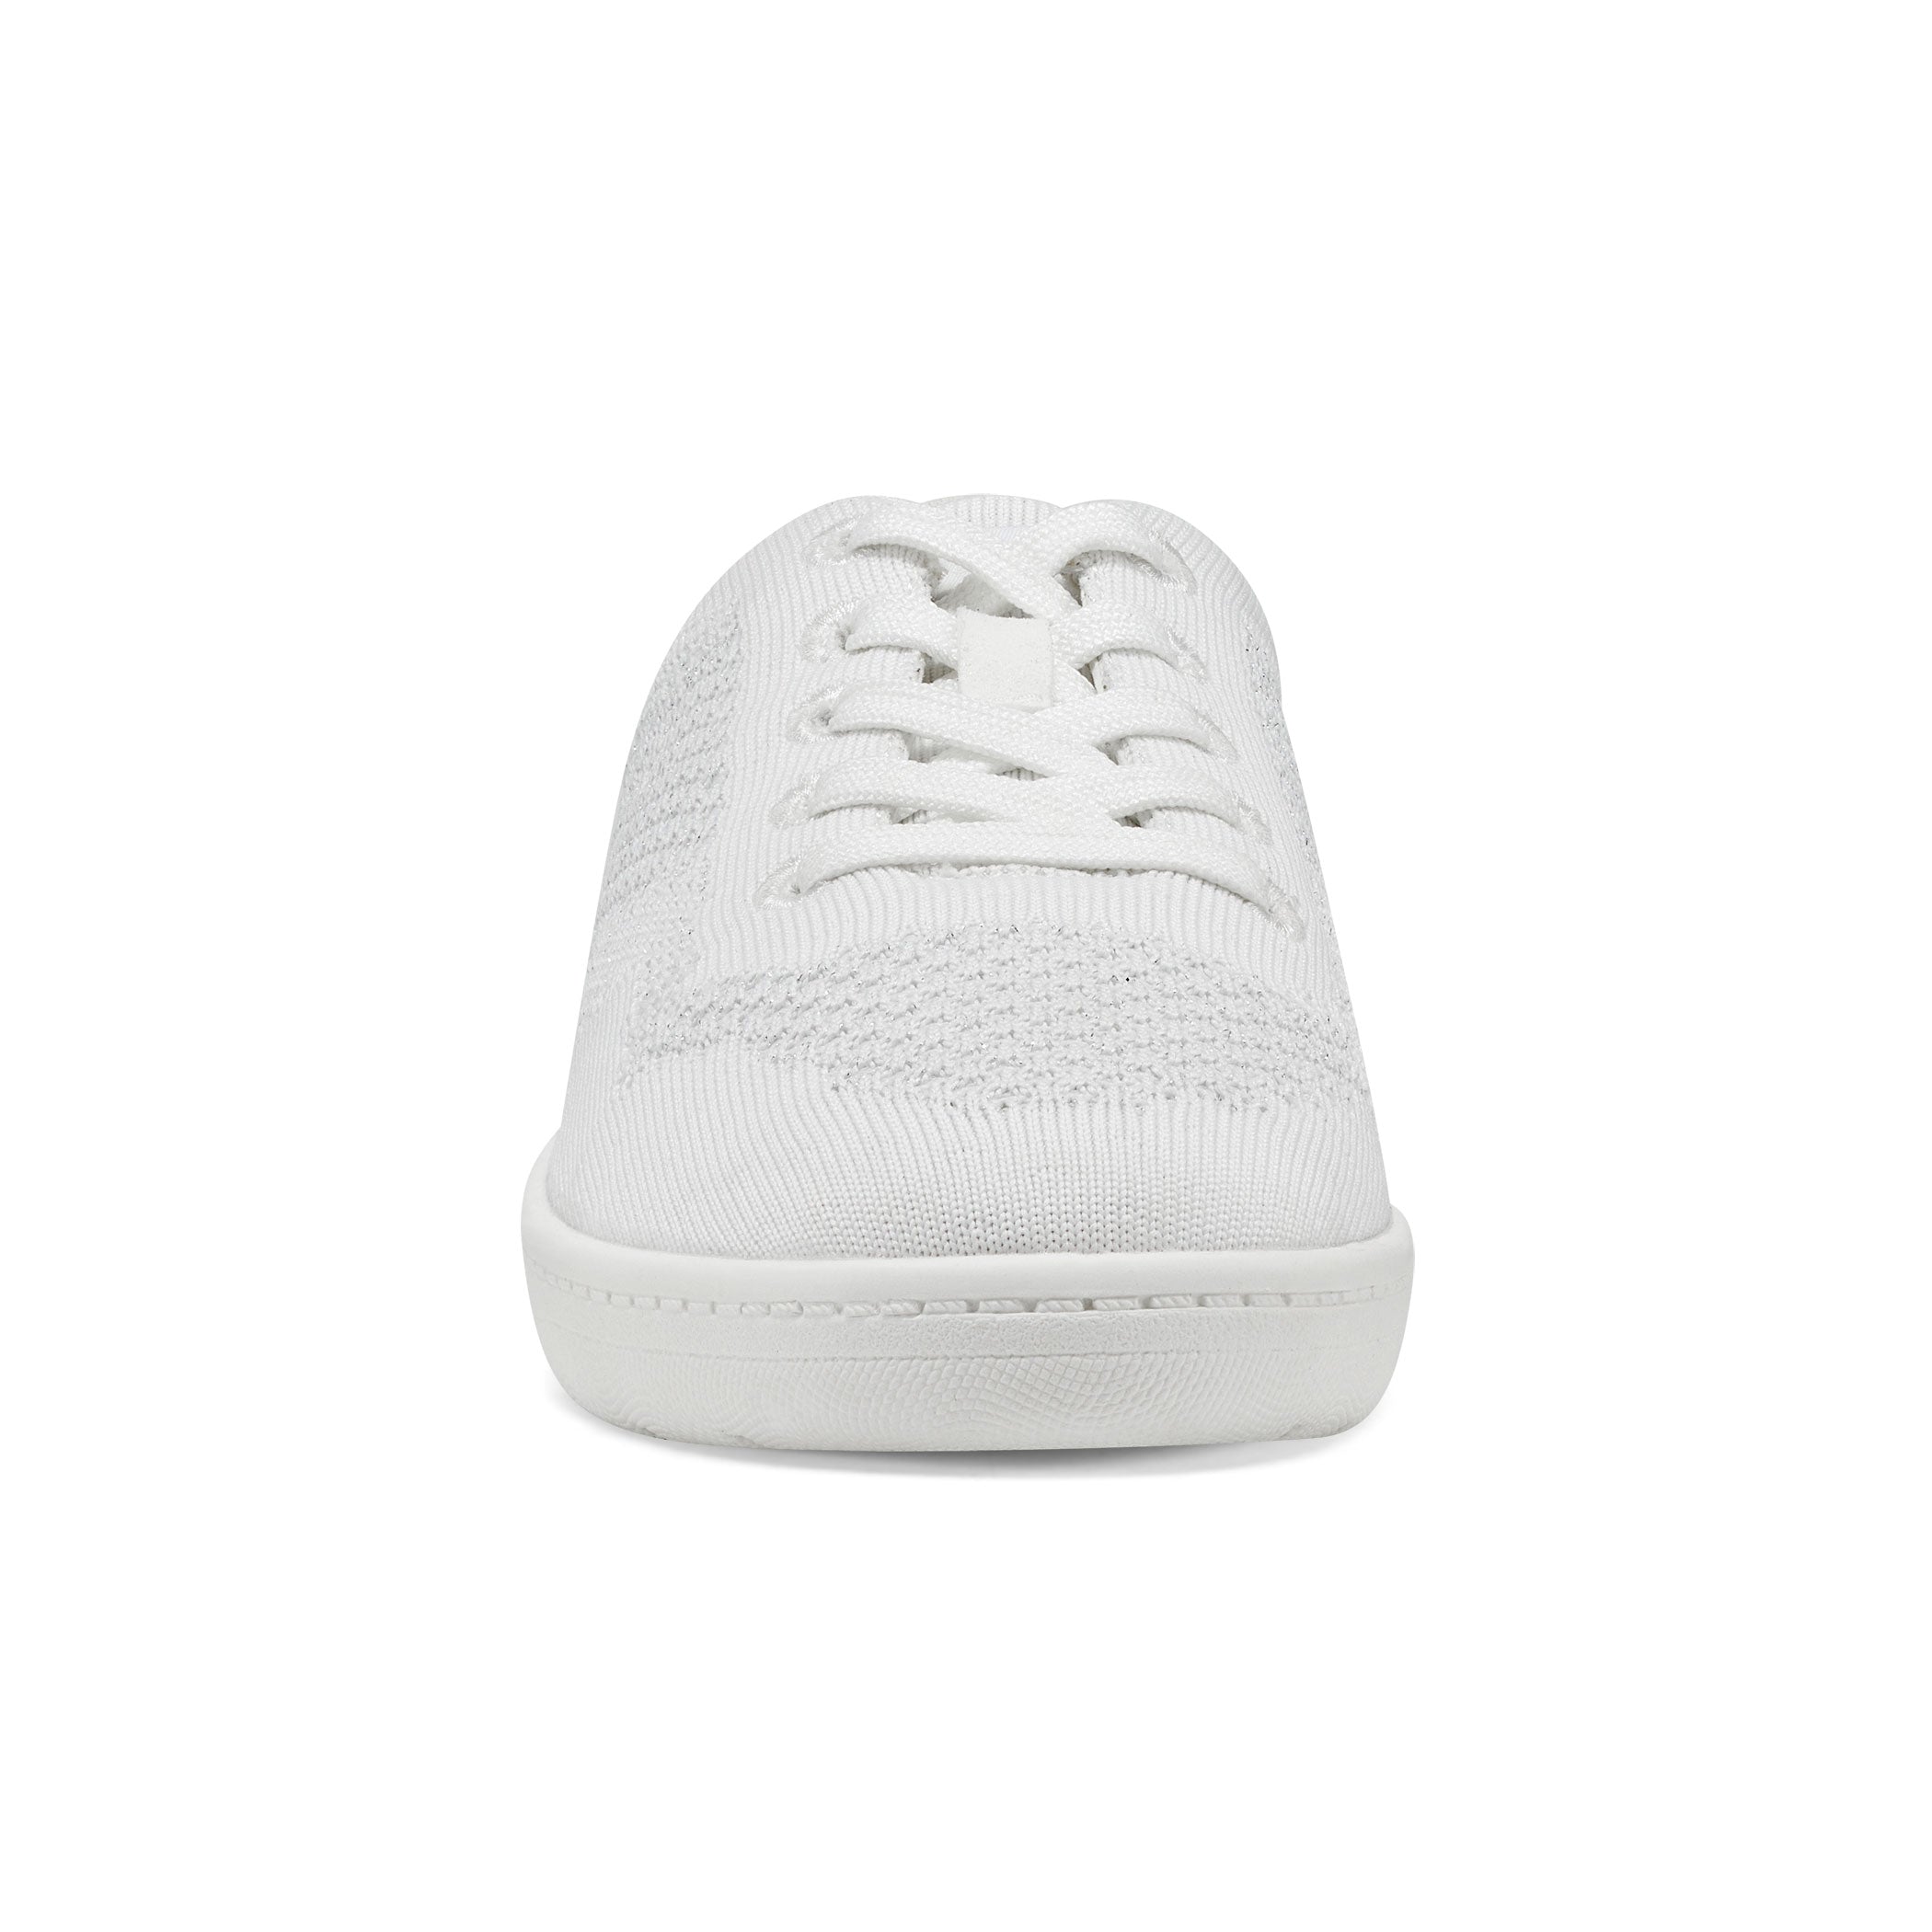 Bzees Tag Along Washable Sneakers - Macy's